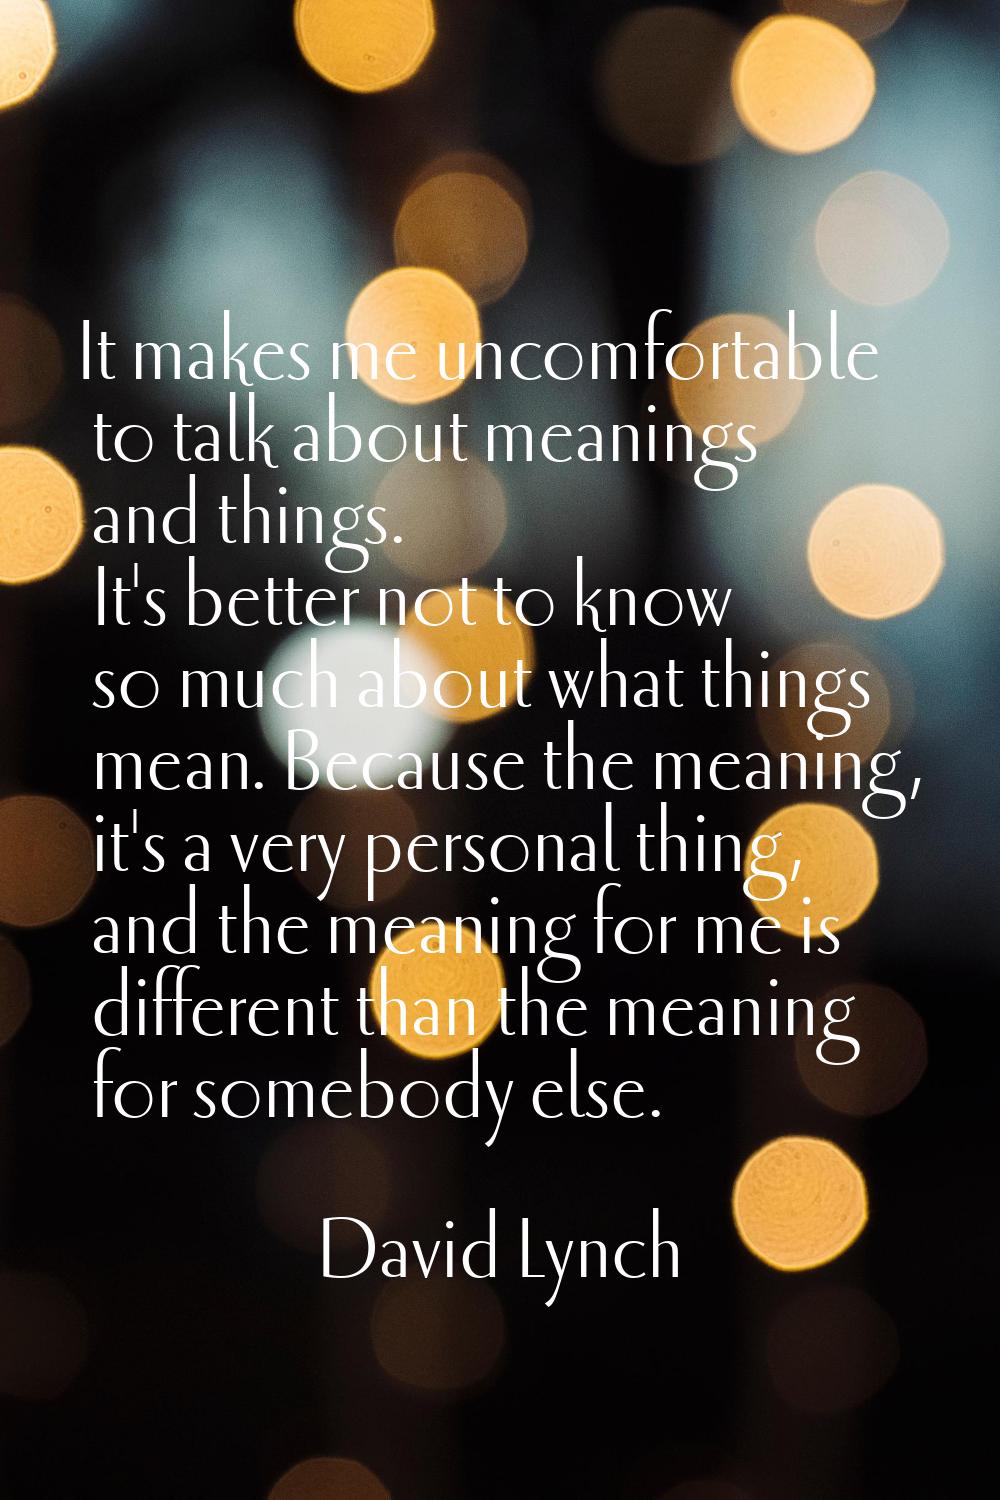 It makes me uncomfortable to talk about meanings and things. It's better not to know so much about 